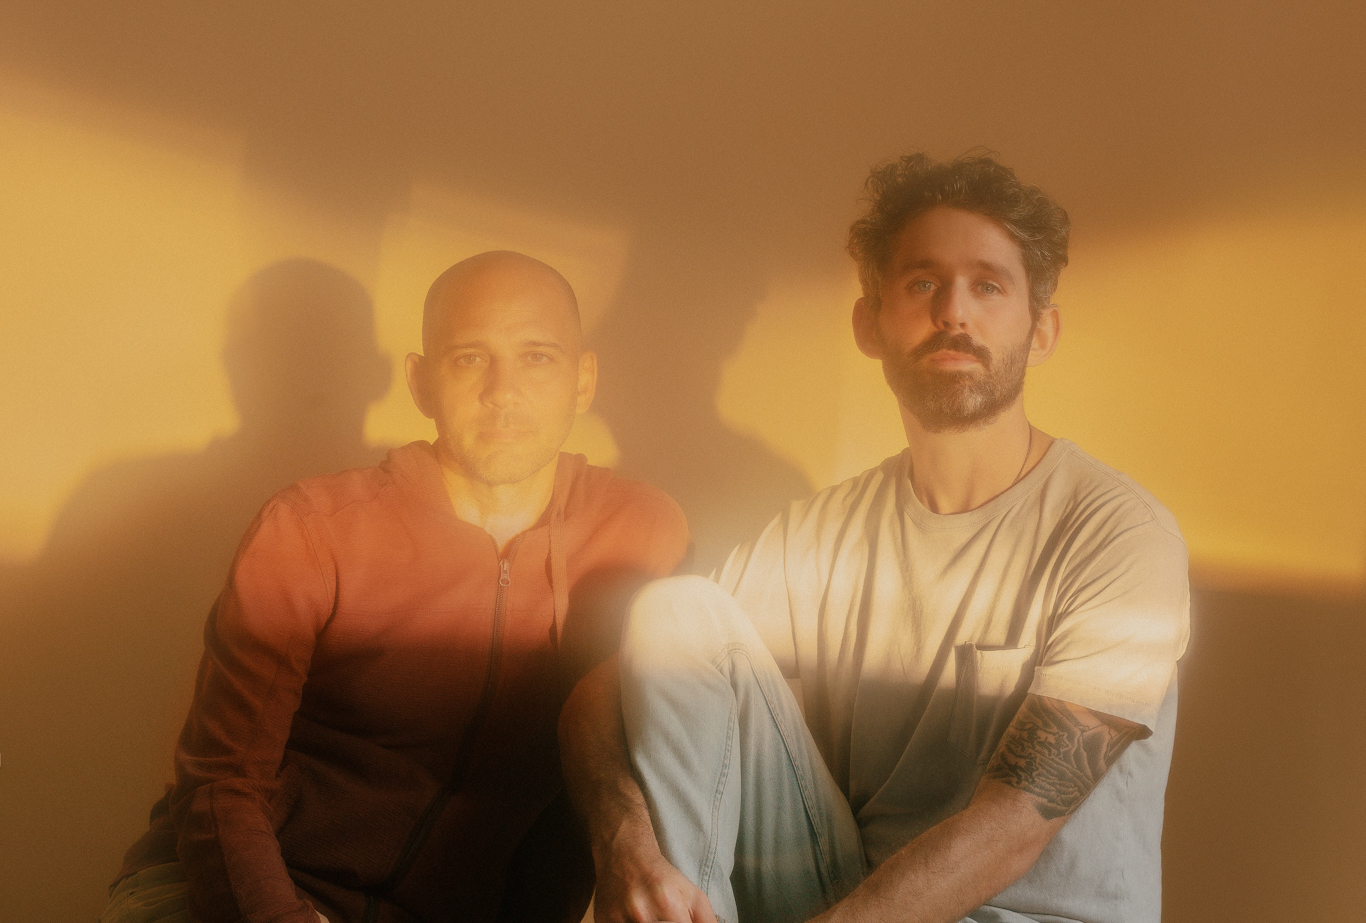 THE ANTLERS surprise release "Losing Light" EP, featuring four reimagined songs from "Green To Gold" 1